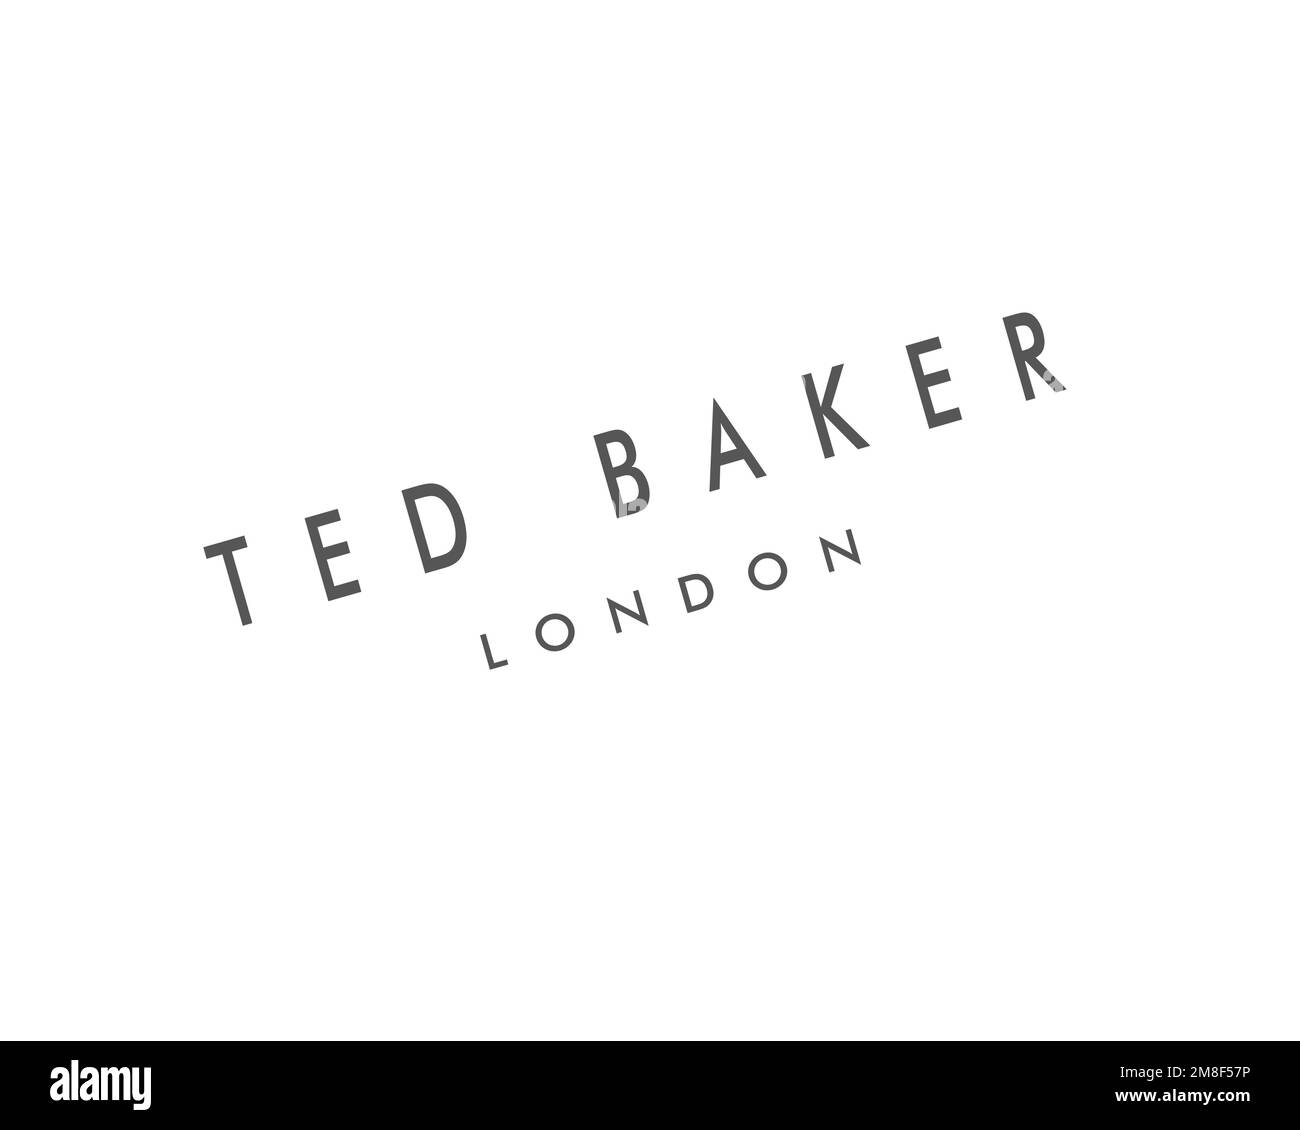 Ted baker logo Black and White Stock Photos & Images - Alamy